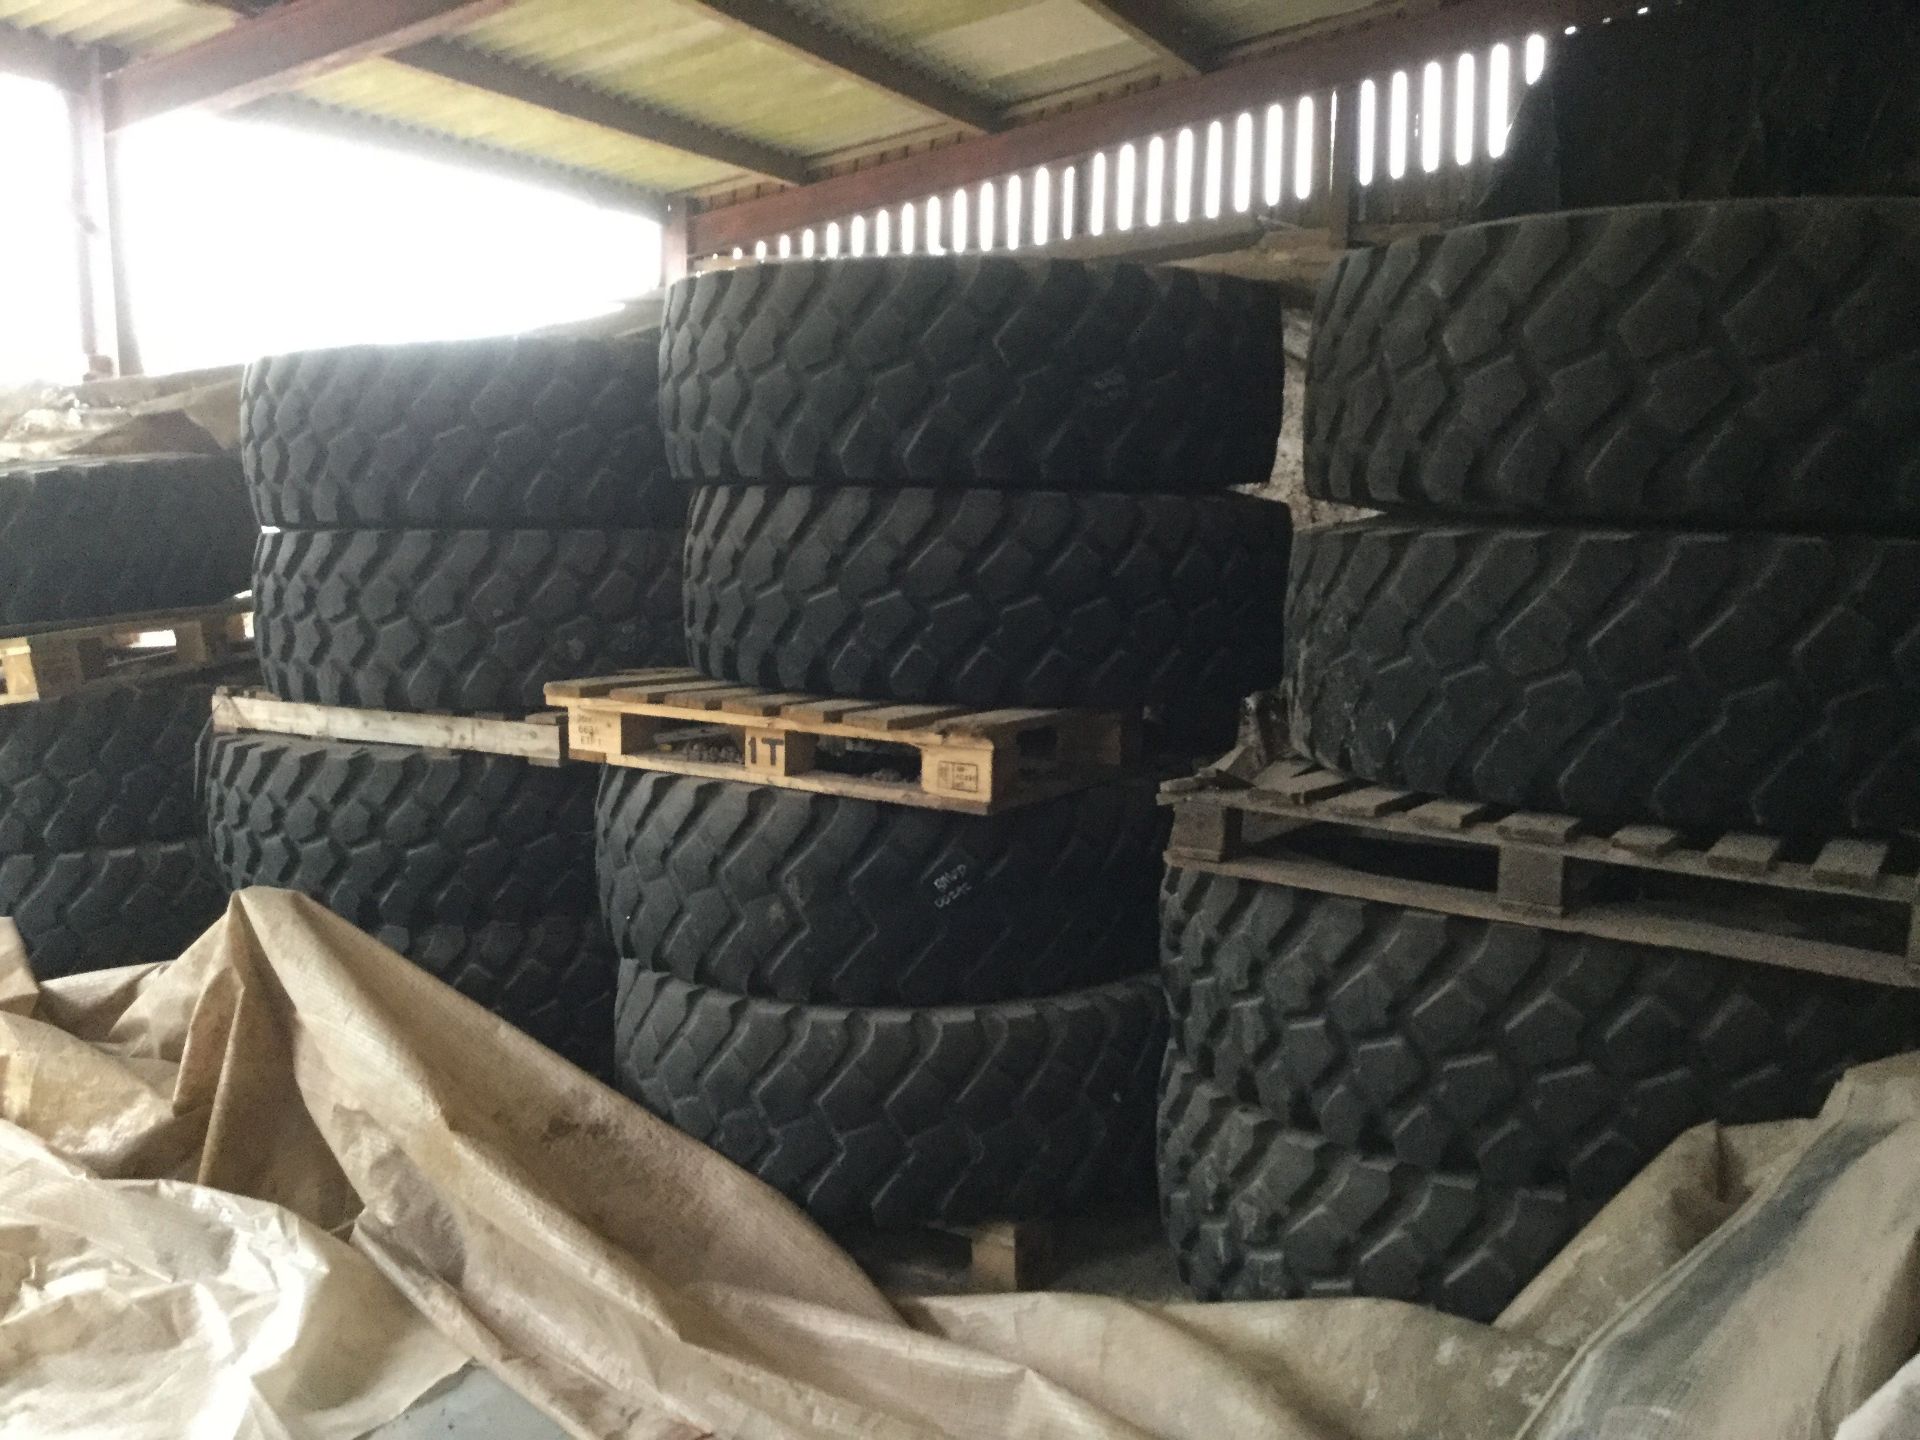 16 job lot of tyres, size 16.00r20